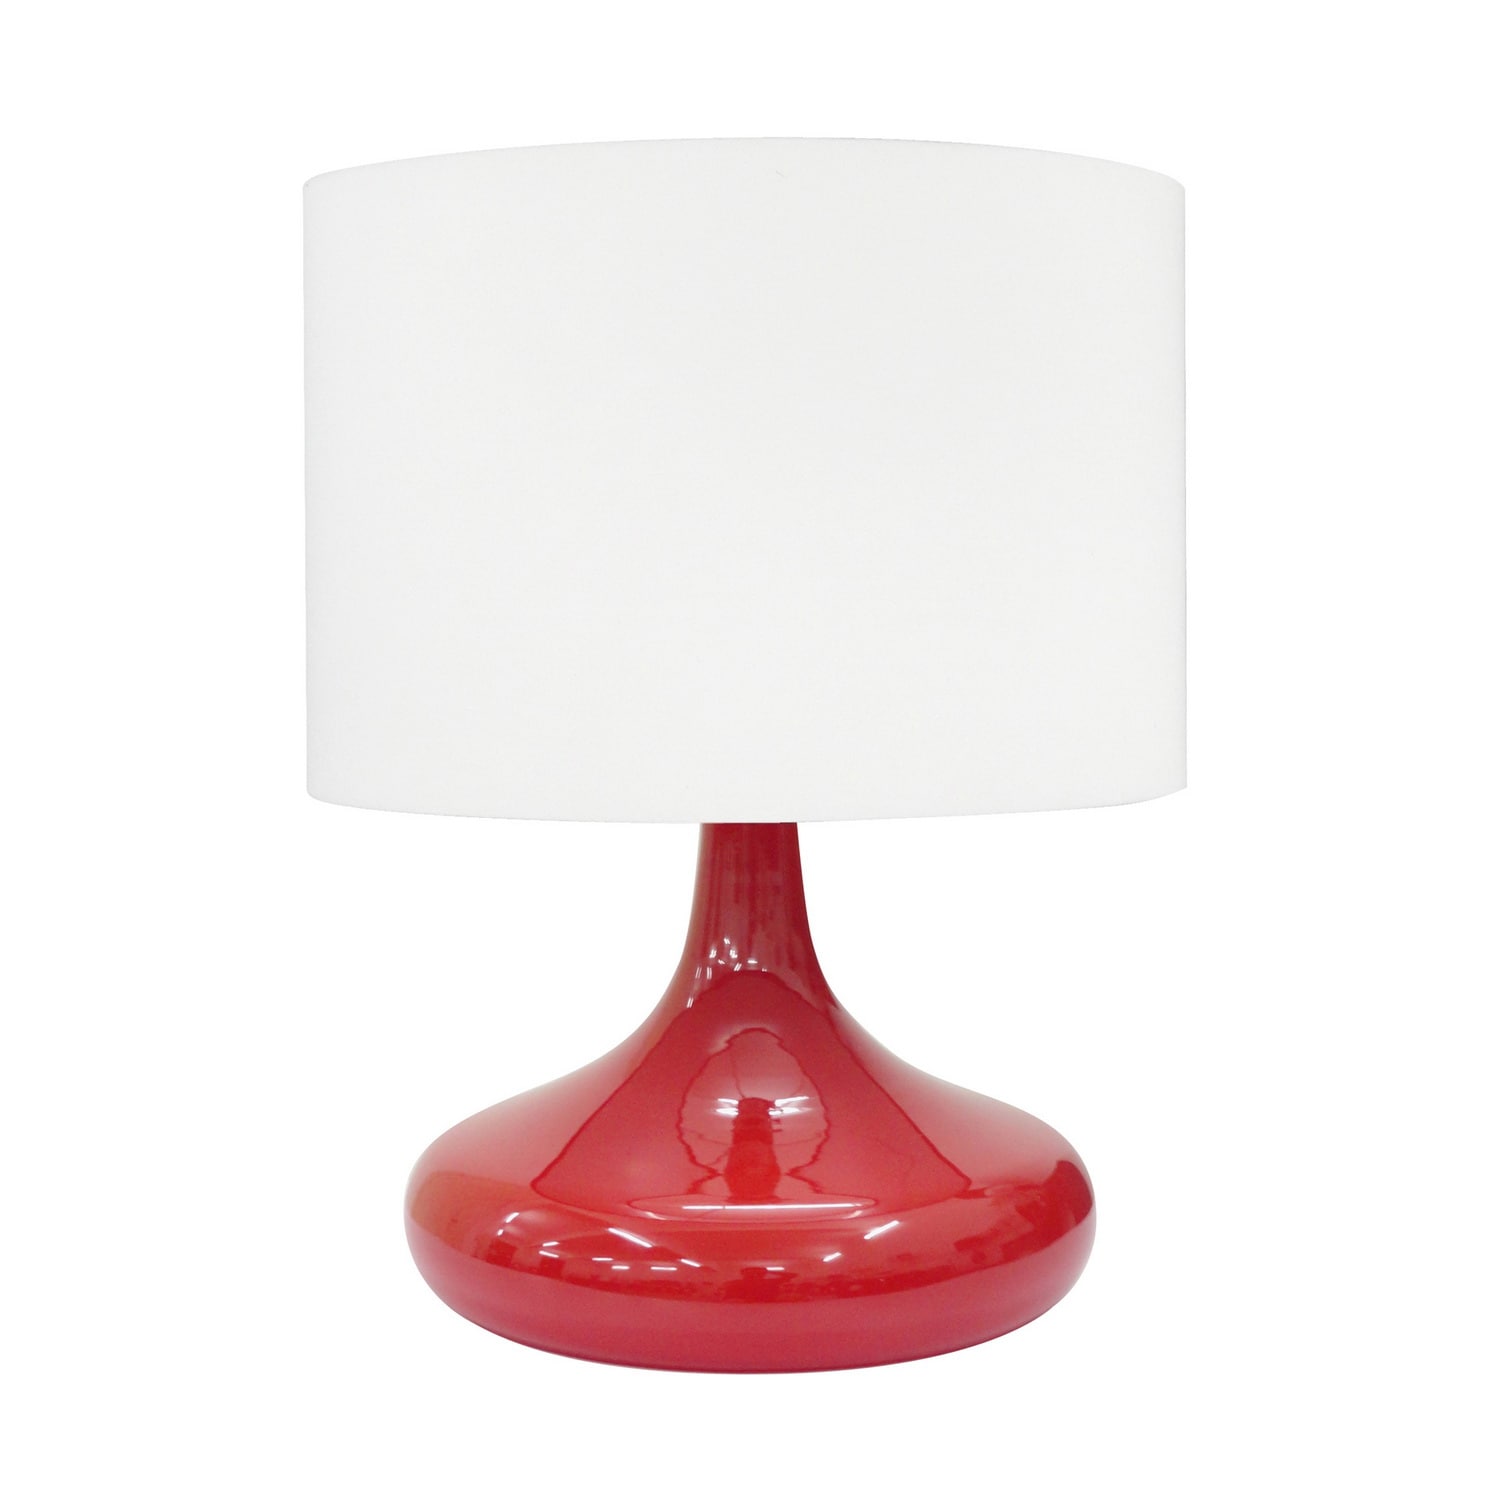 Integrity 16.5 inch Amber Opal Glass Table Lamp Today $121.99 Sale $